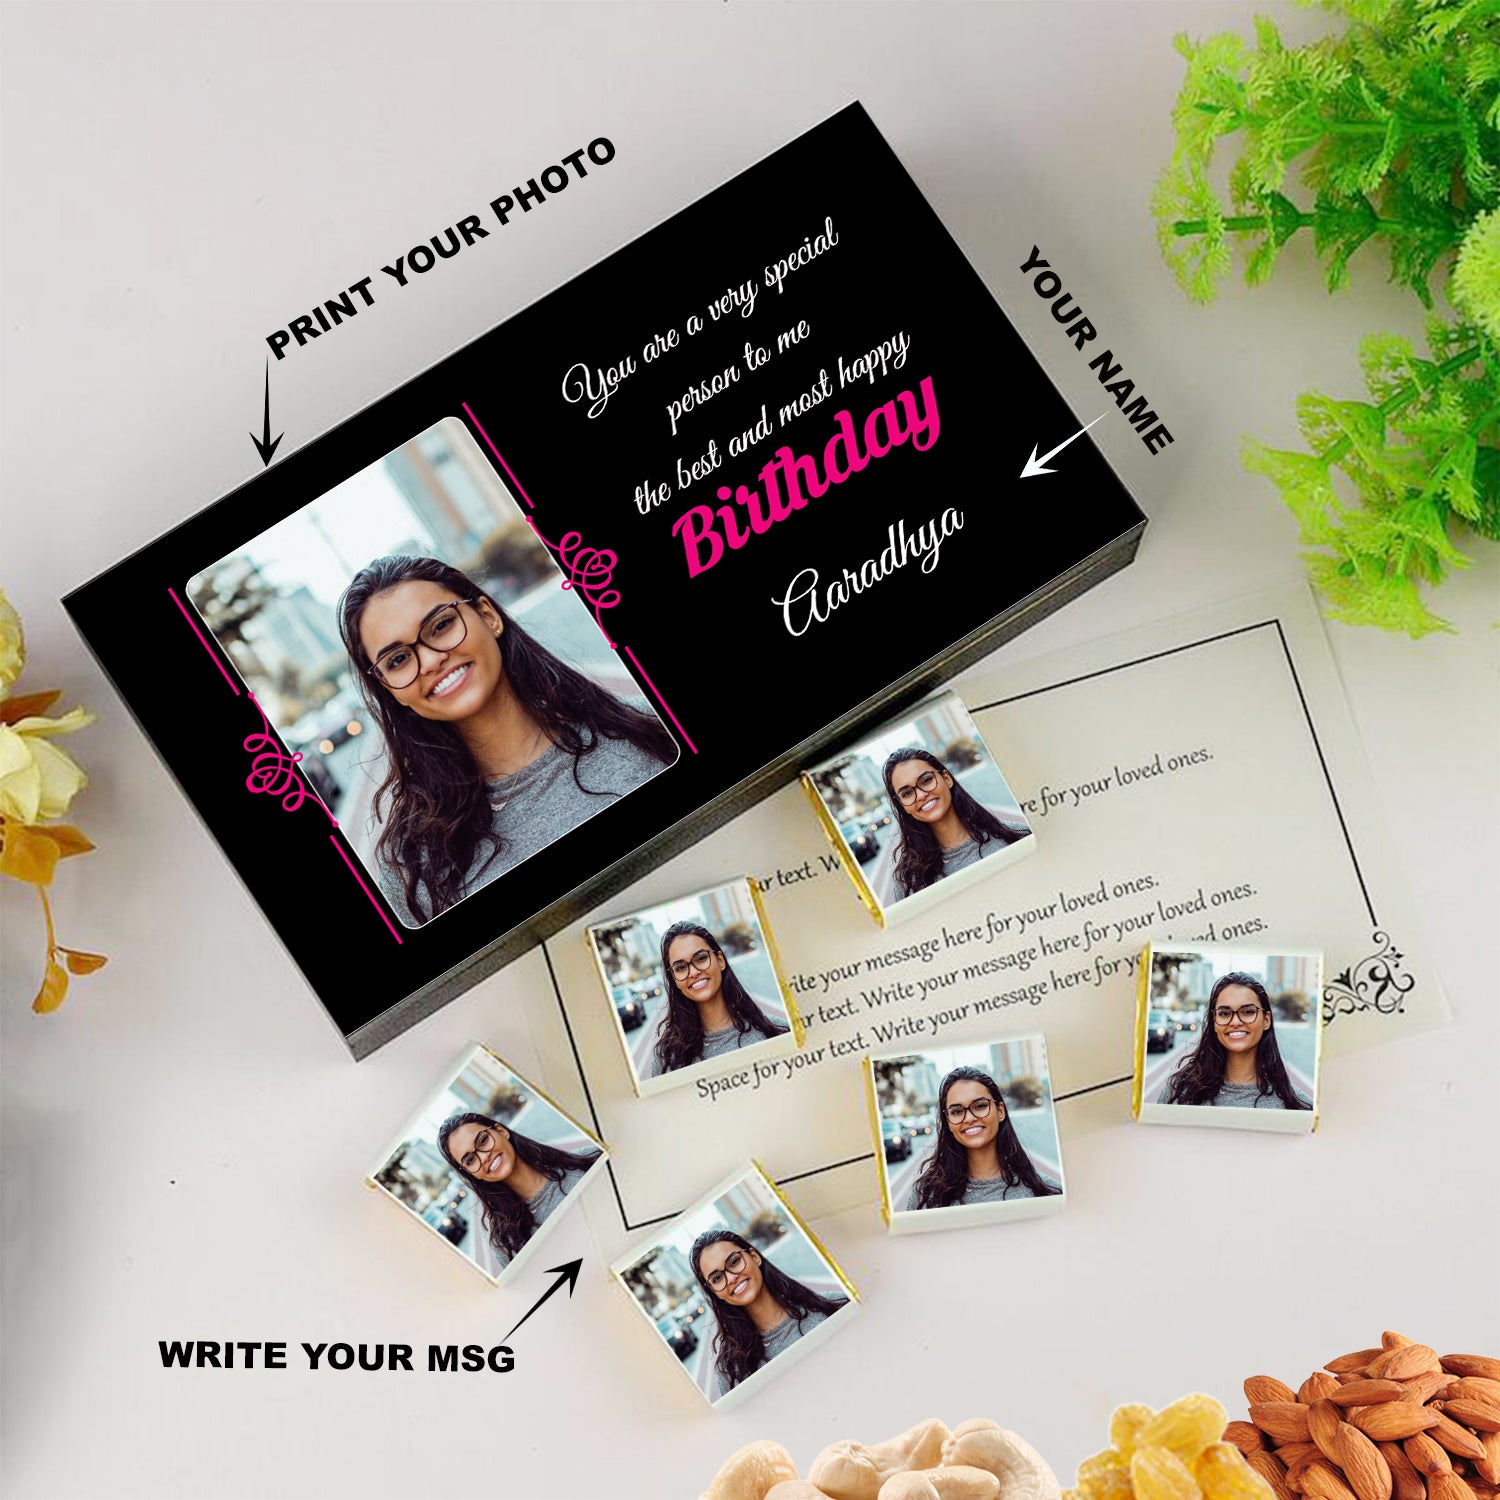 Personalised Chocolate Gift Box  Chocolates With Names  Photo Customised Gifts  Photo India Dark Chocolate Customized Near Me  For Birthdays Chocolate Message Inside In Special Birthday Birthday  Happy Birthday 1 Rupees Images